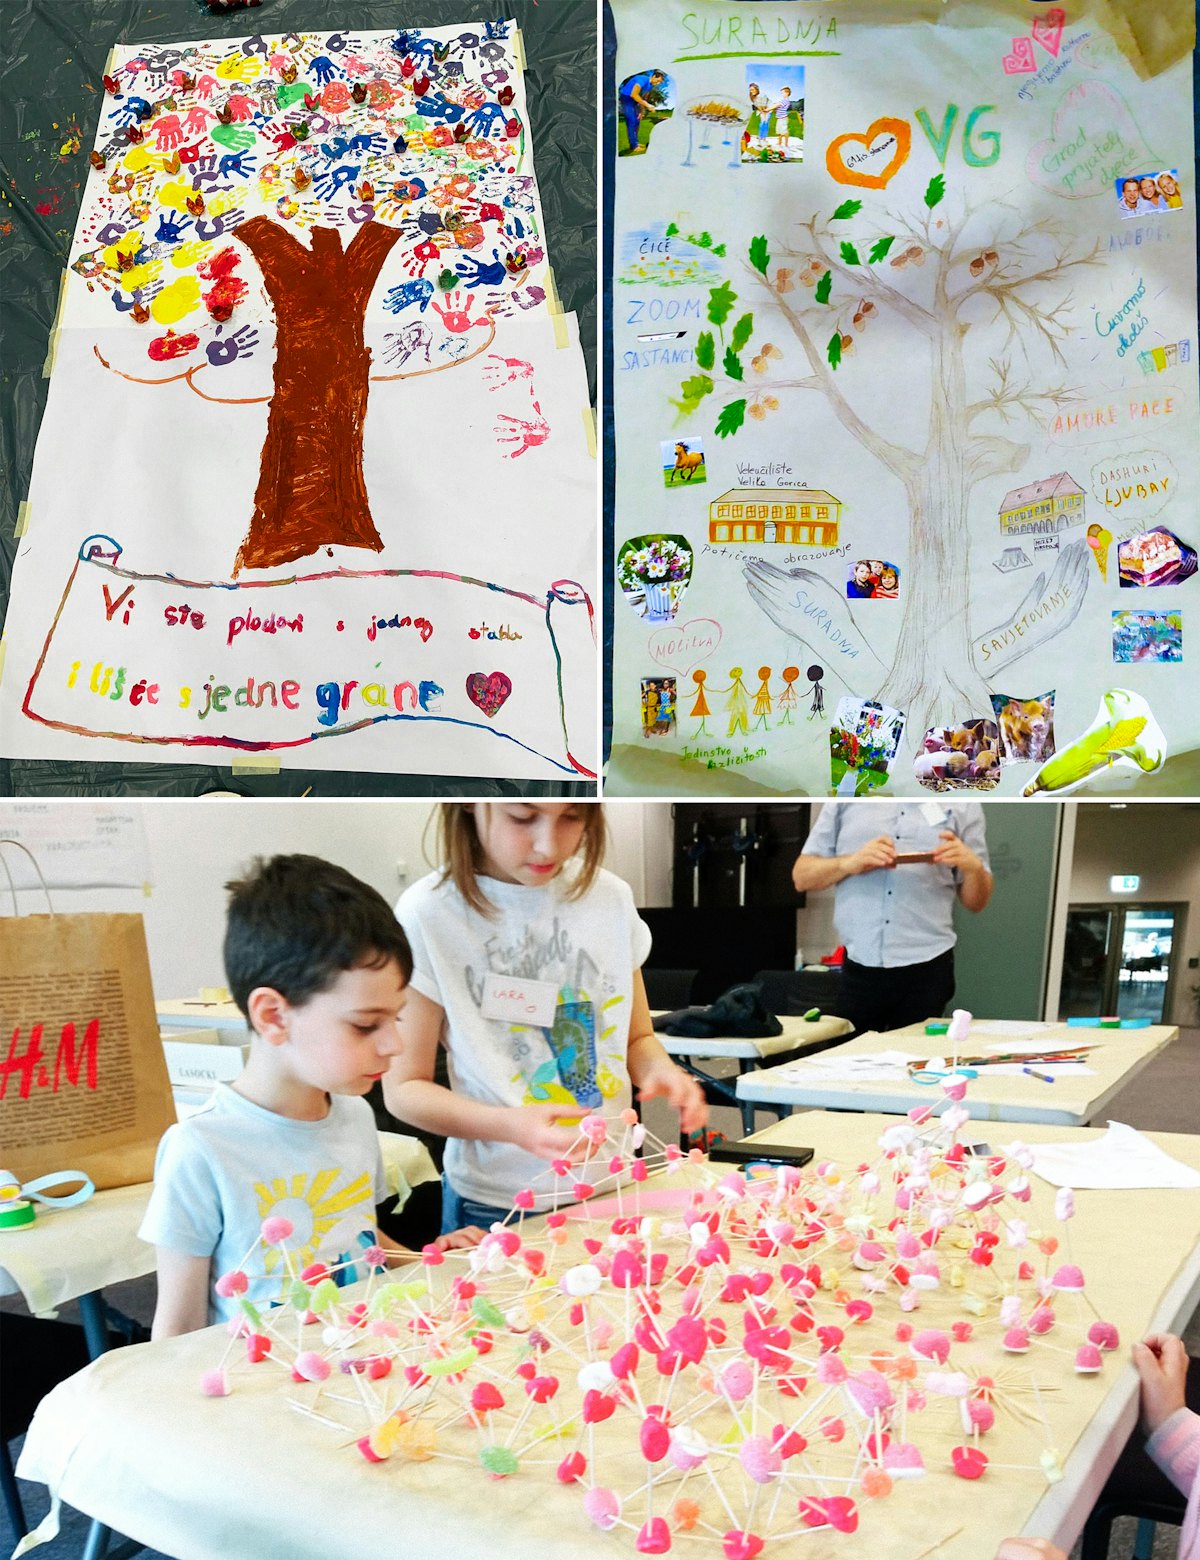 Children at this conference in Croatia created various pieces of art on the theme of the betterment of society.